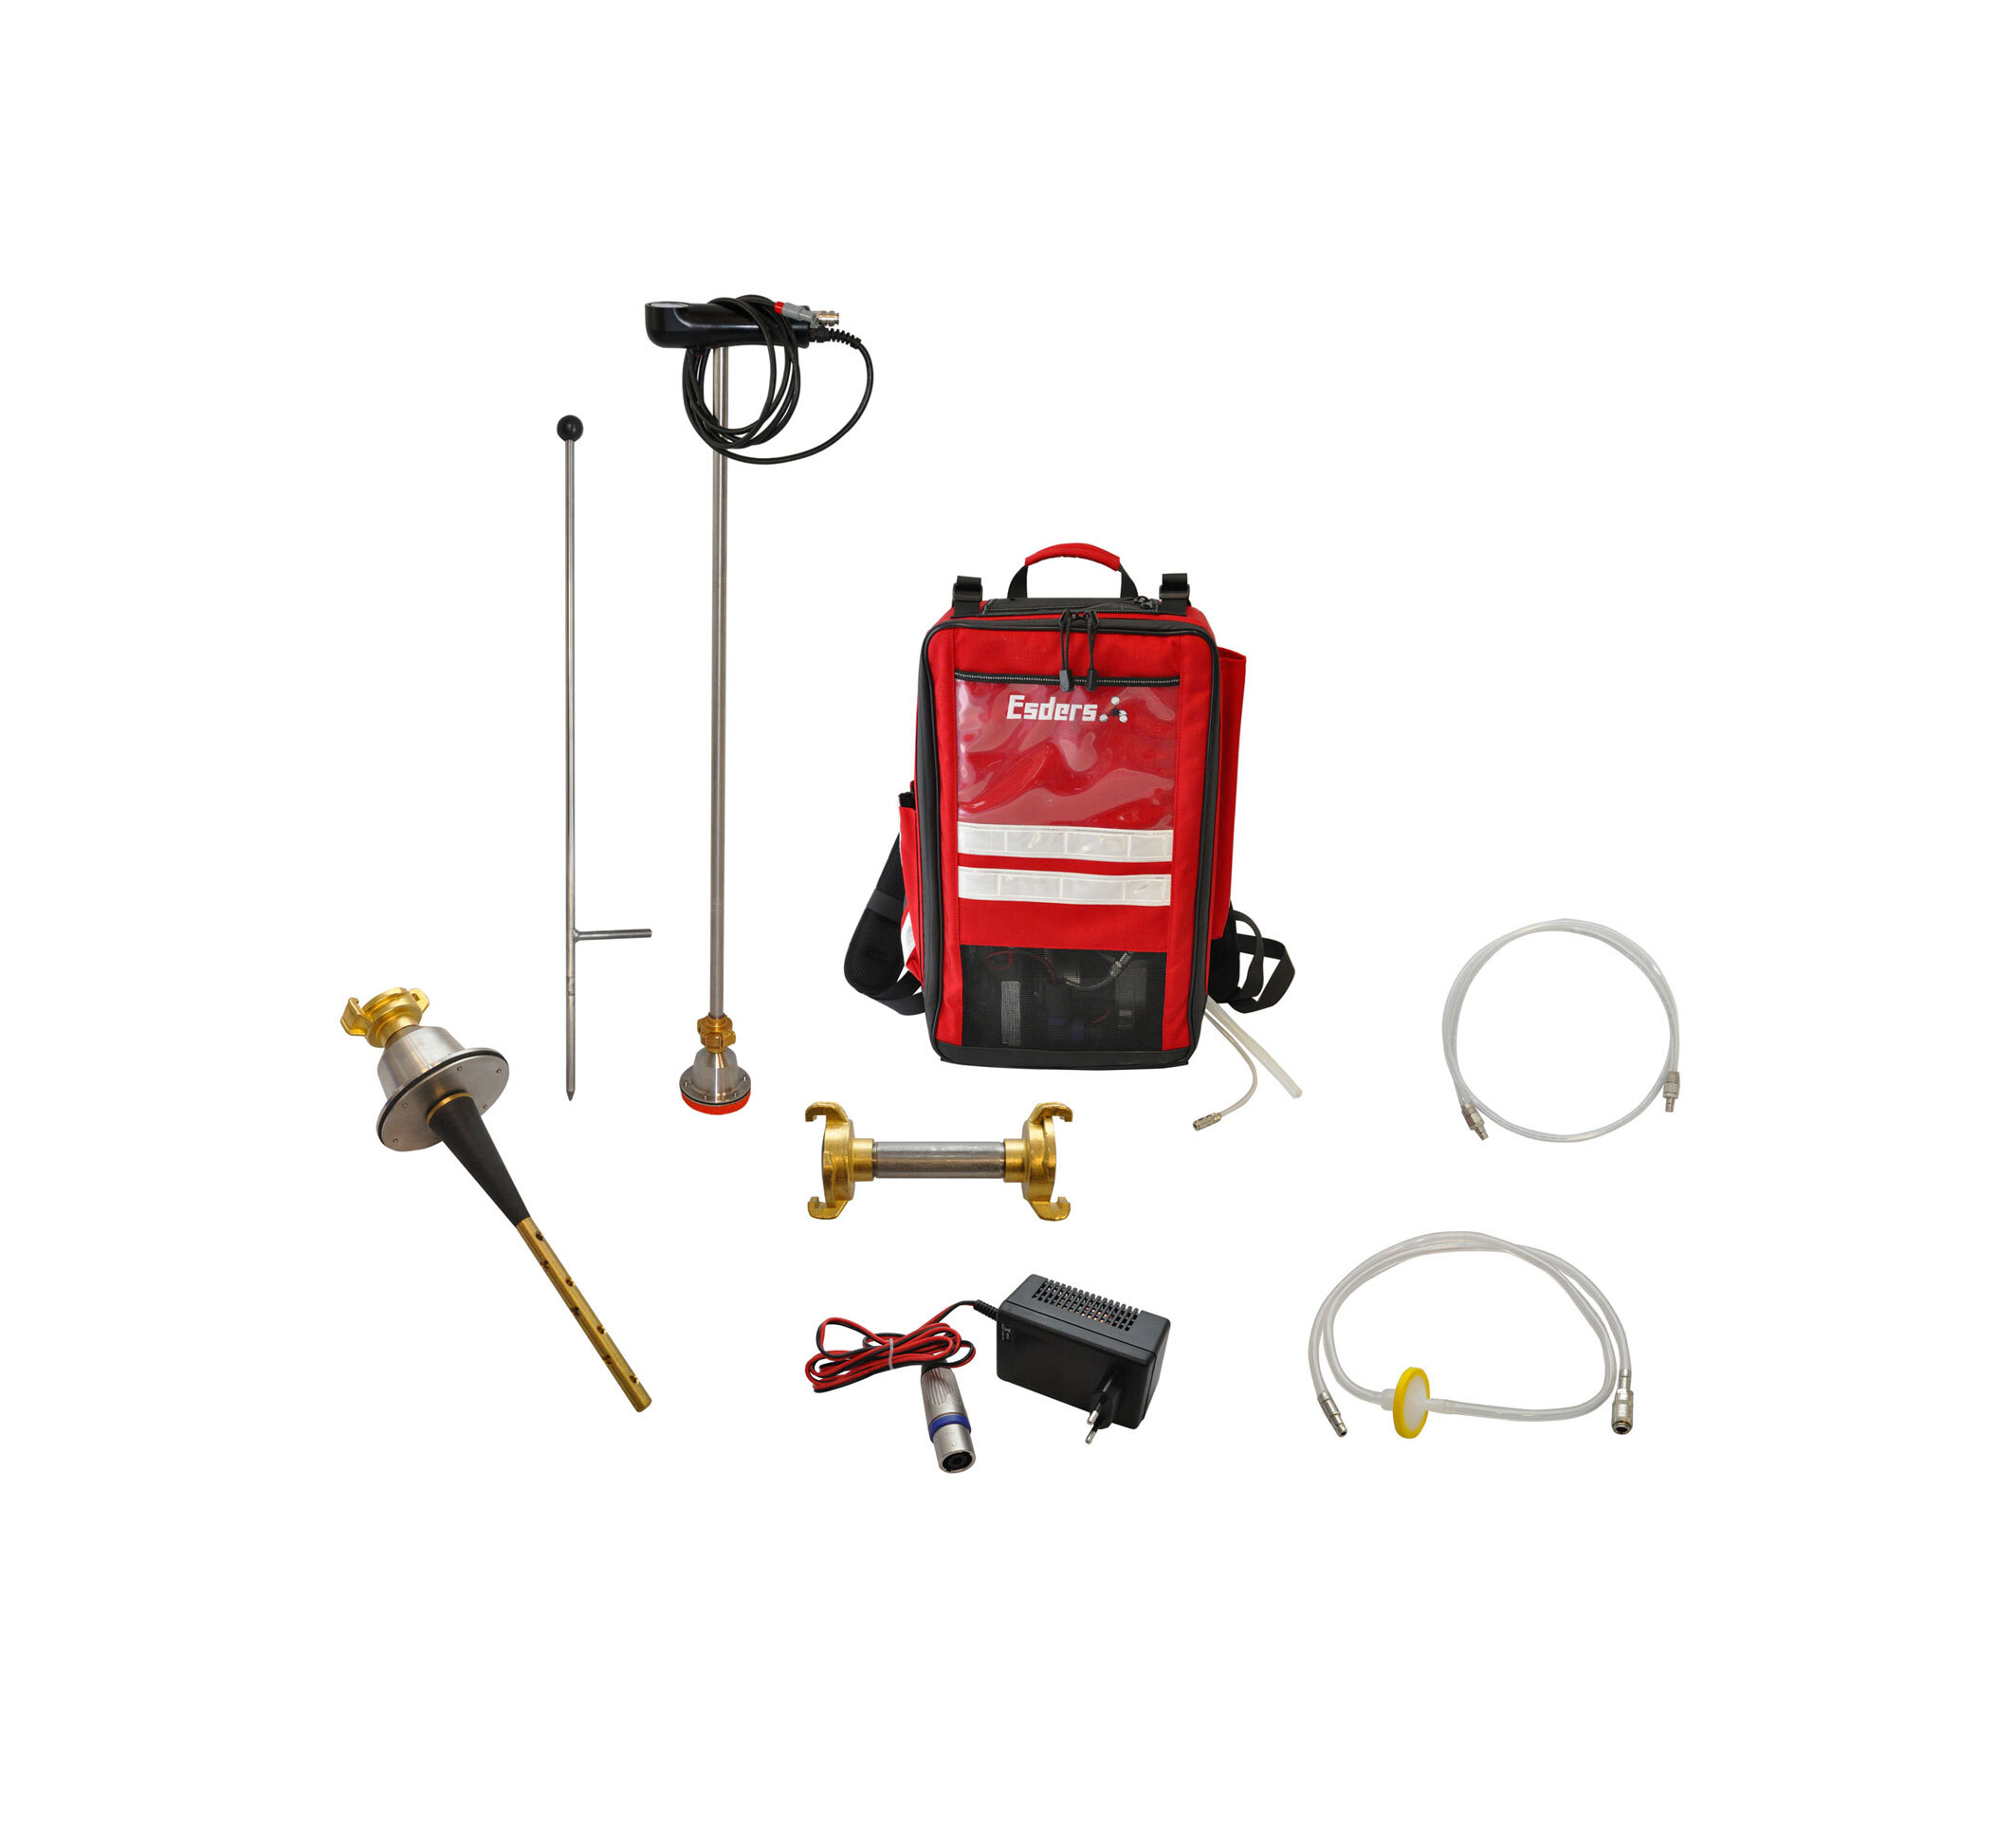 Carrying system VSS15 for gas leak detection